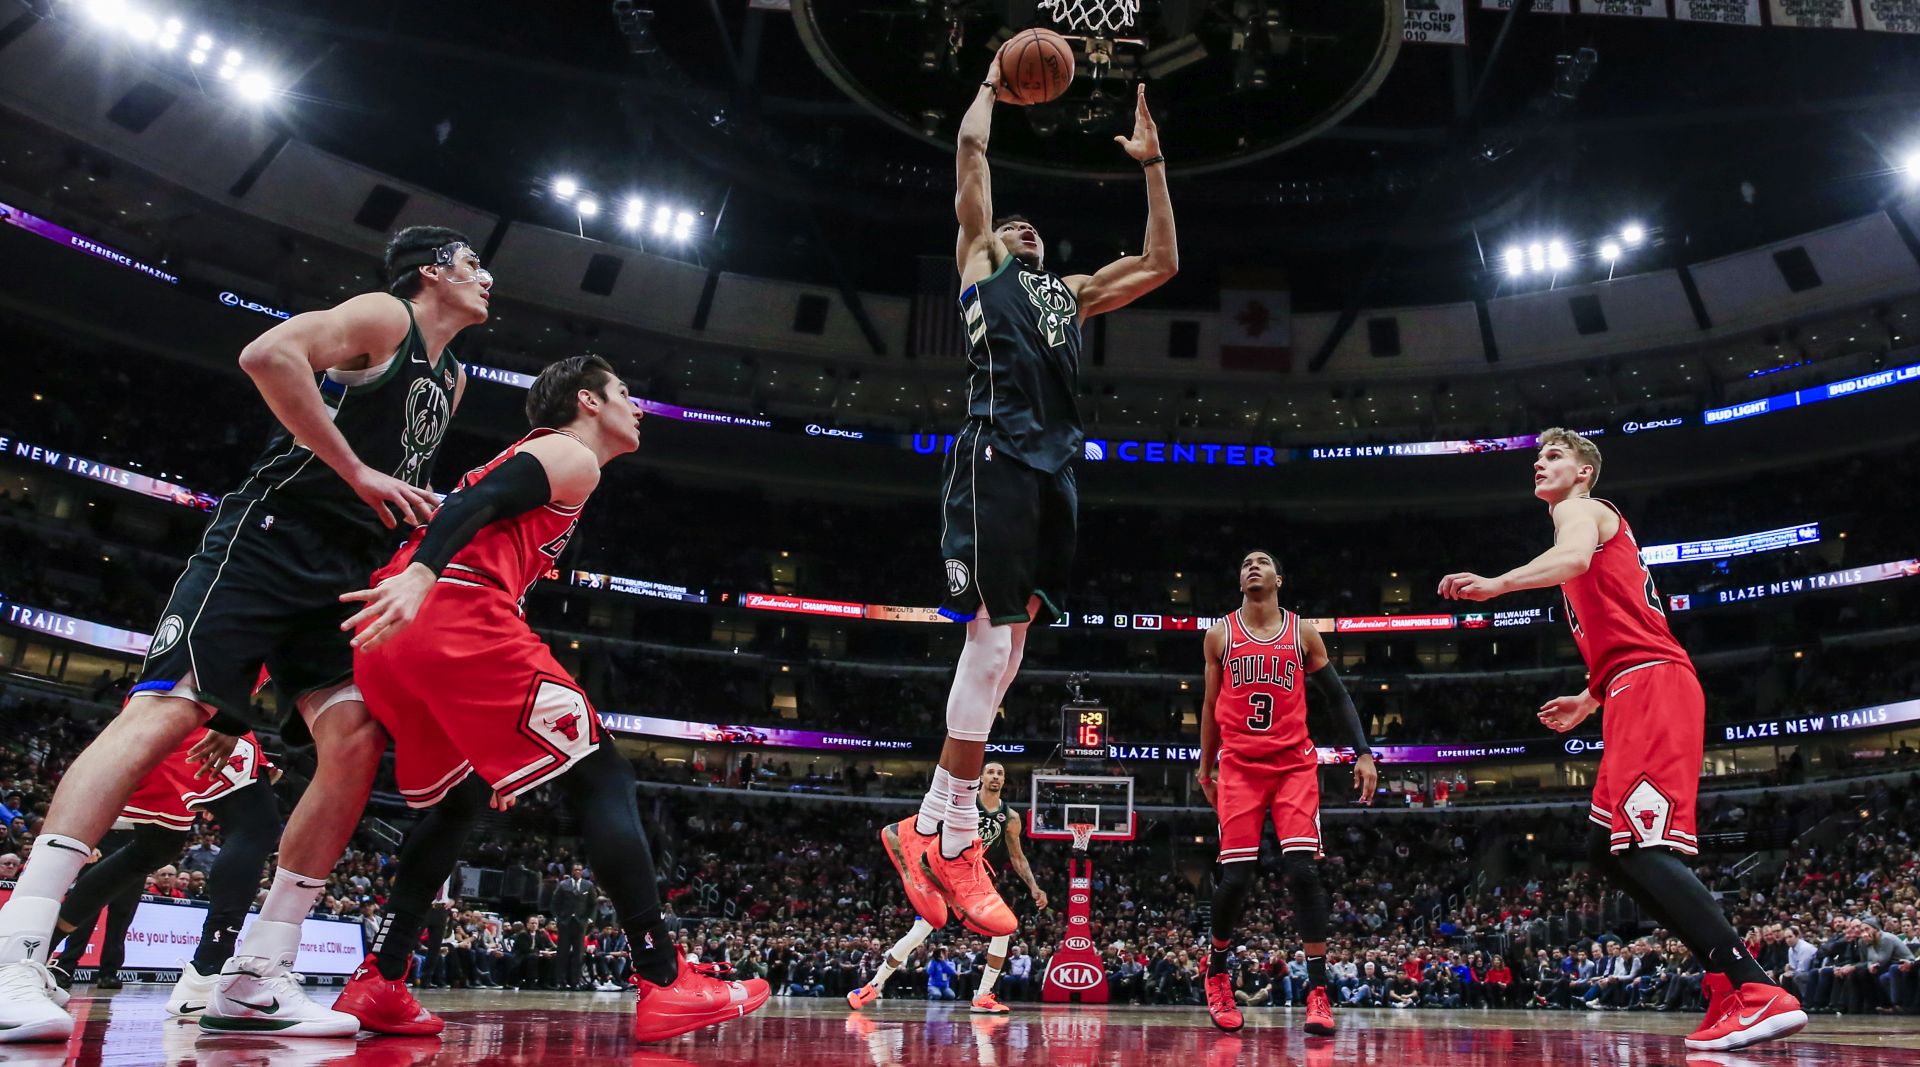 epa07363401 Milwaukee Bucks forward Giannis Antetokounmpo of Greece scores during the NBA game between the Milwaukee Bucks and the Chicago Bulls at the United Center in Chicago, Illinois, USA, 11 February 2019.  EPA/TANNEN MAURY SHUTTERSTOCK OUT